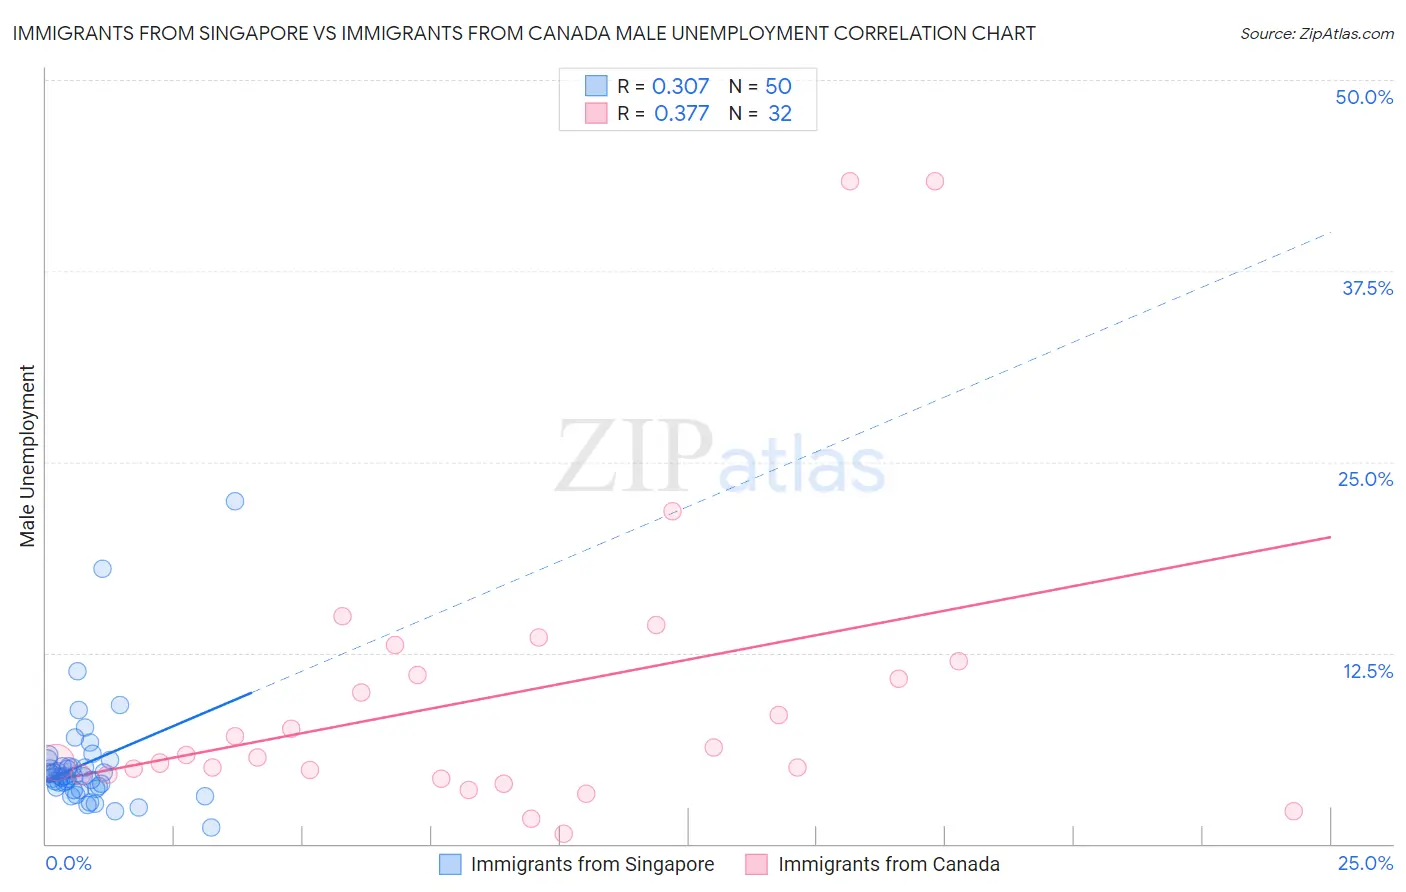 Immigrants from Singapore vs Immigrants from Canada Male Unemployment